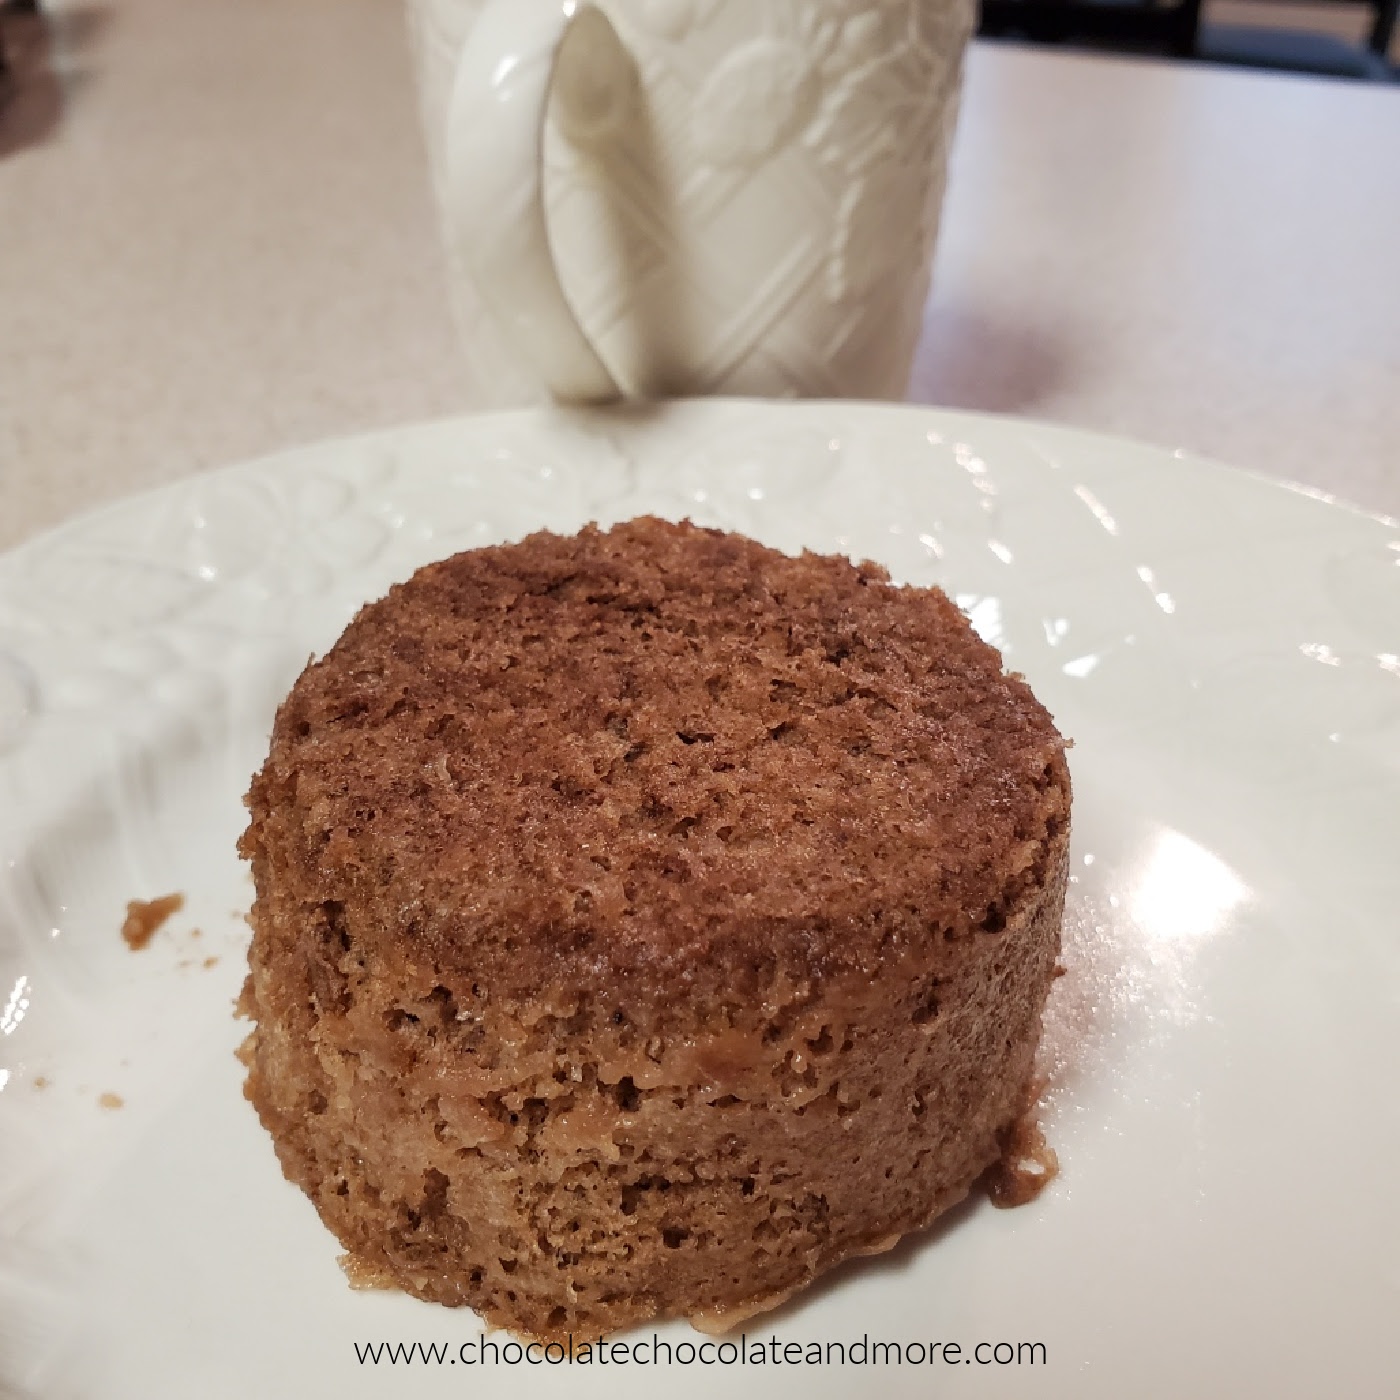 a small round chocolate cake on a plate with a mug in the background